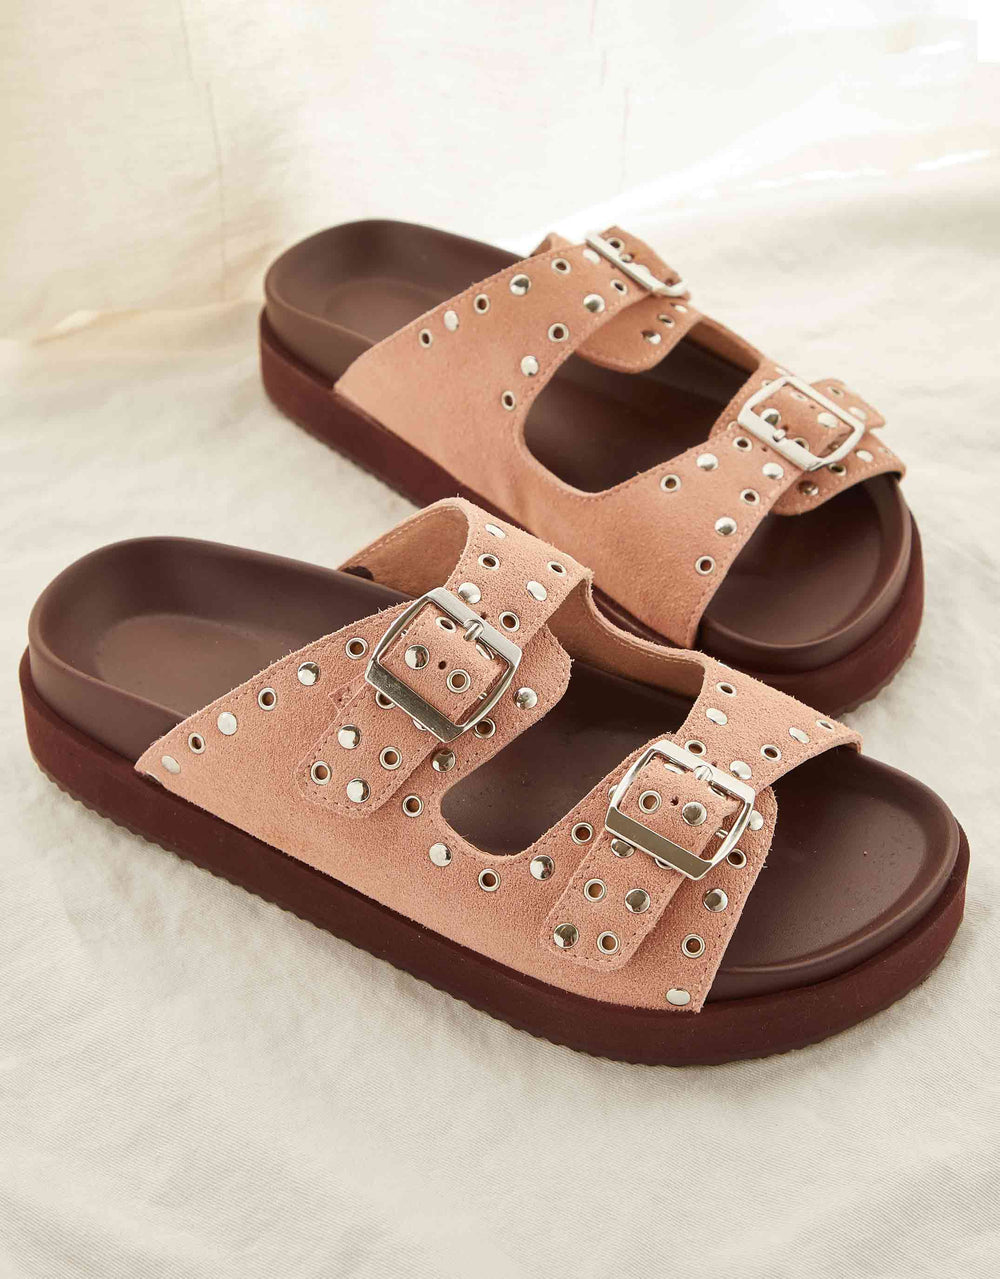 Maggie Leather Slides - Pink Suede